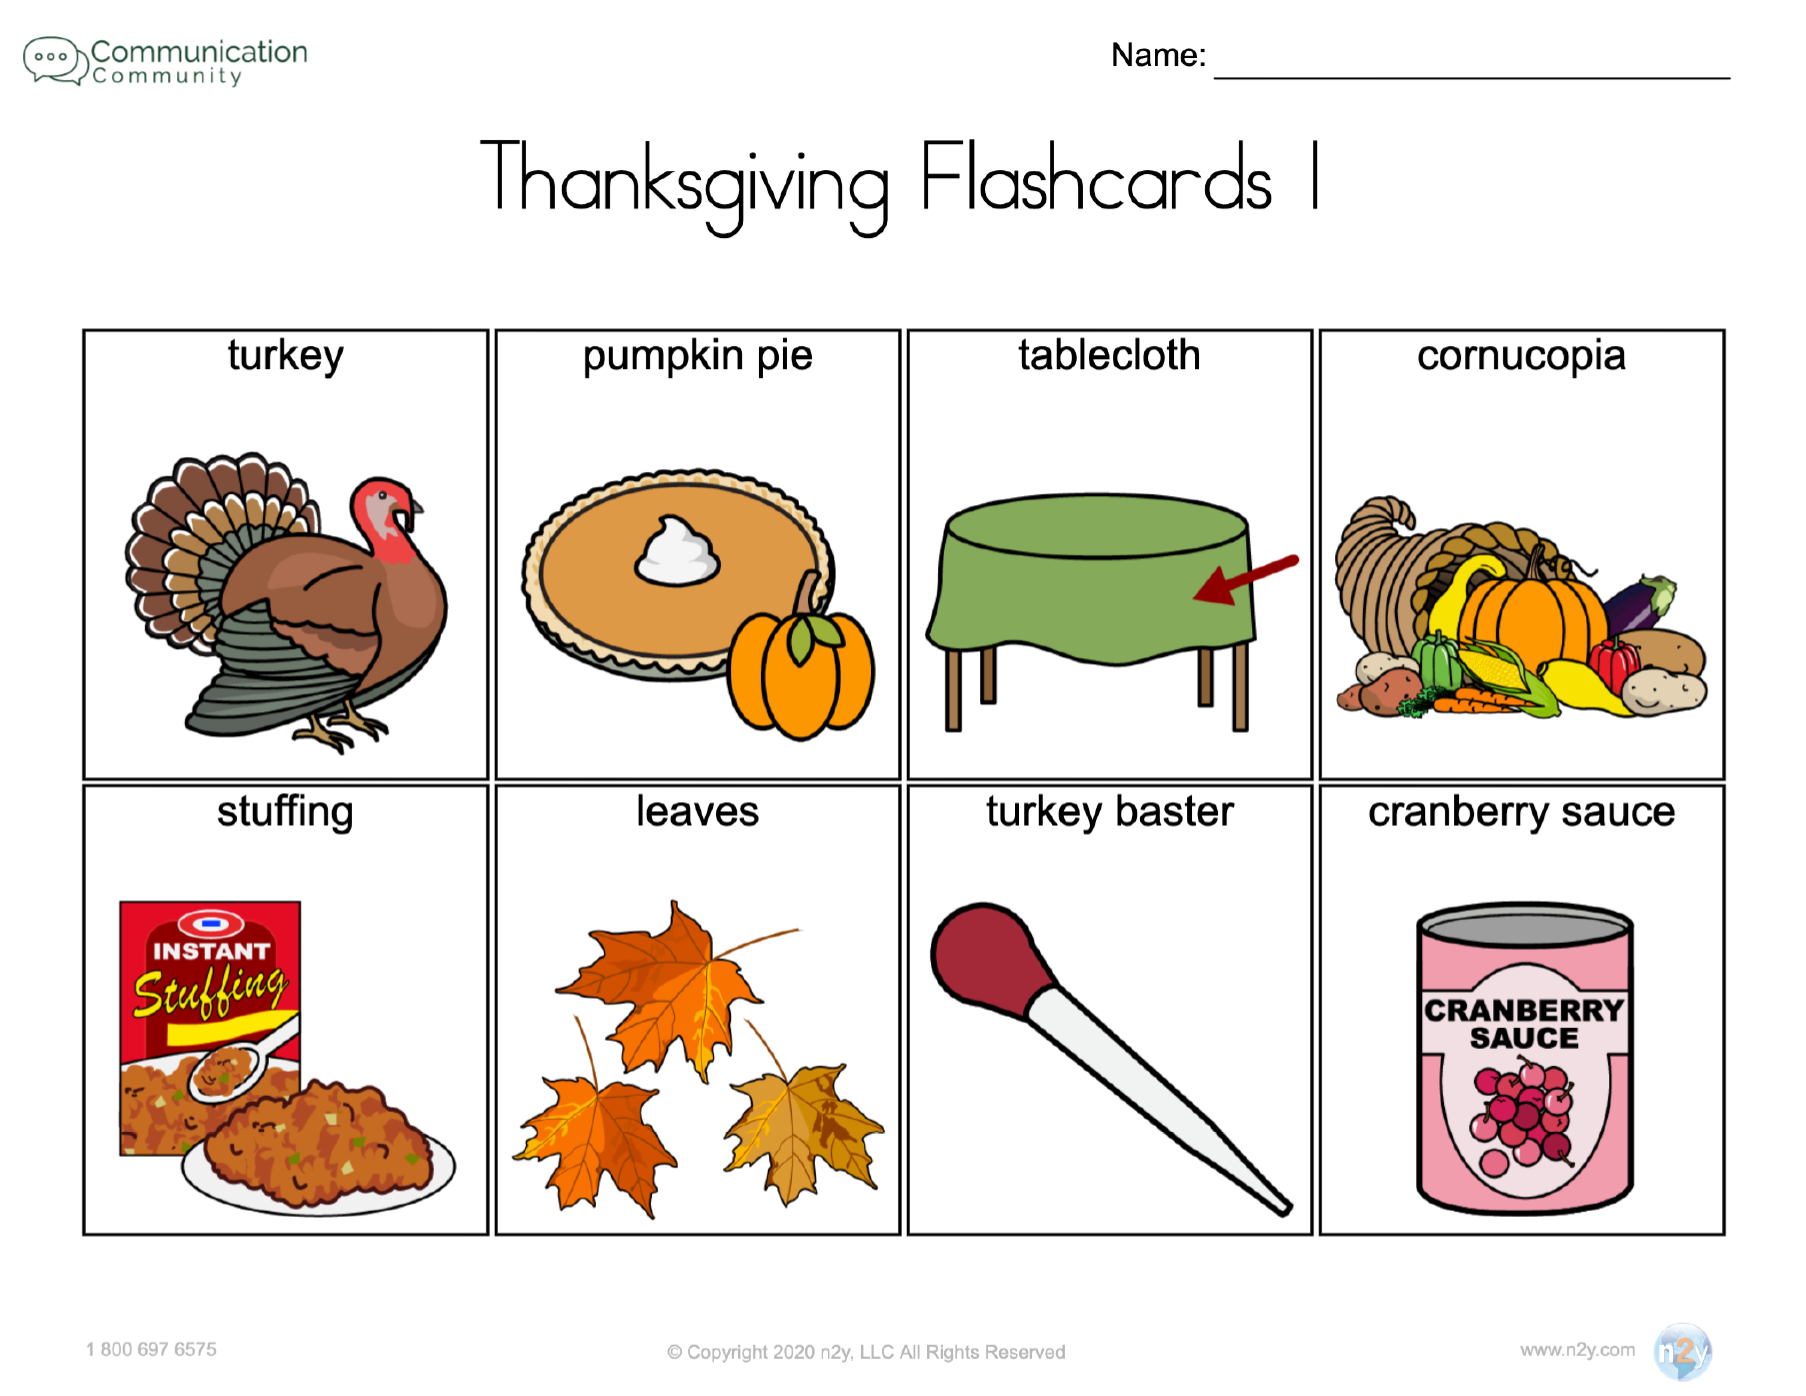 Thanksgiving Flashcards [Therapy, Classroom, or Home Activity]